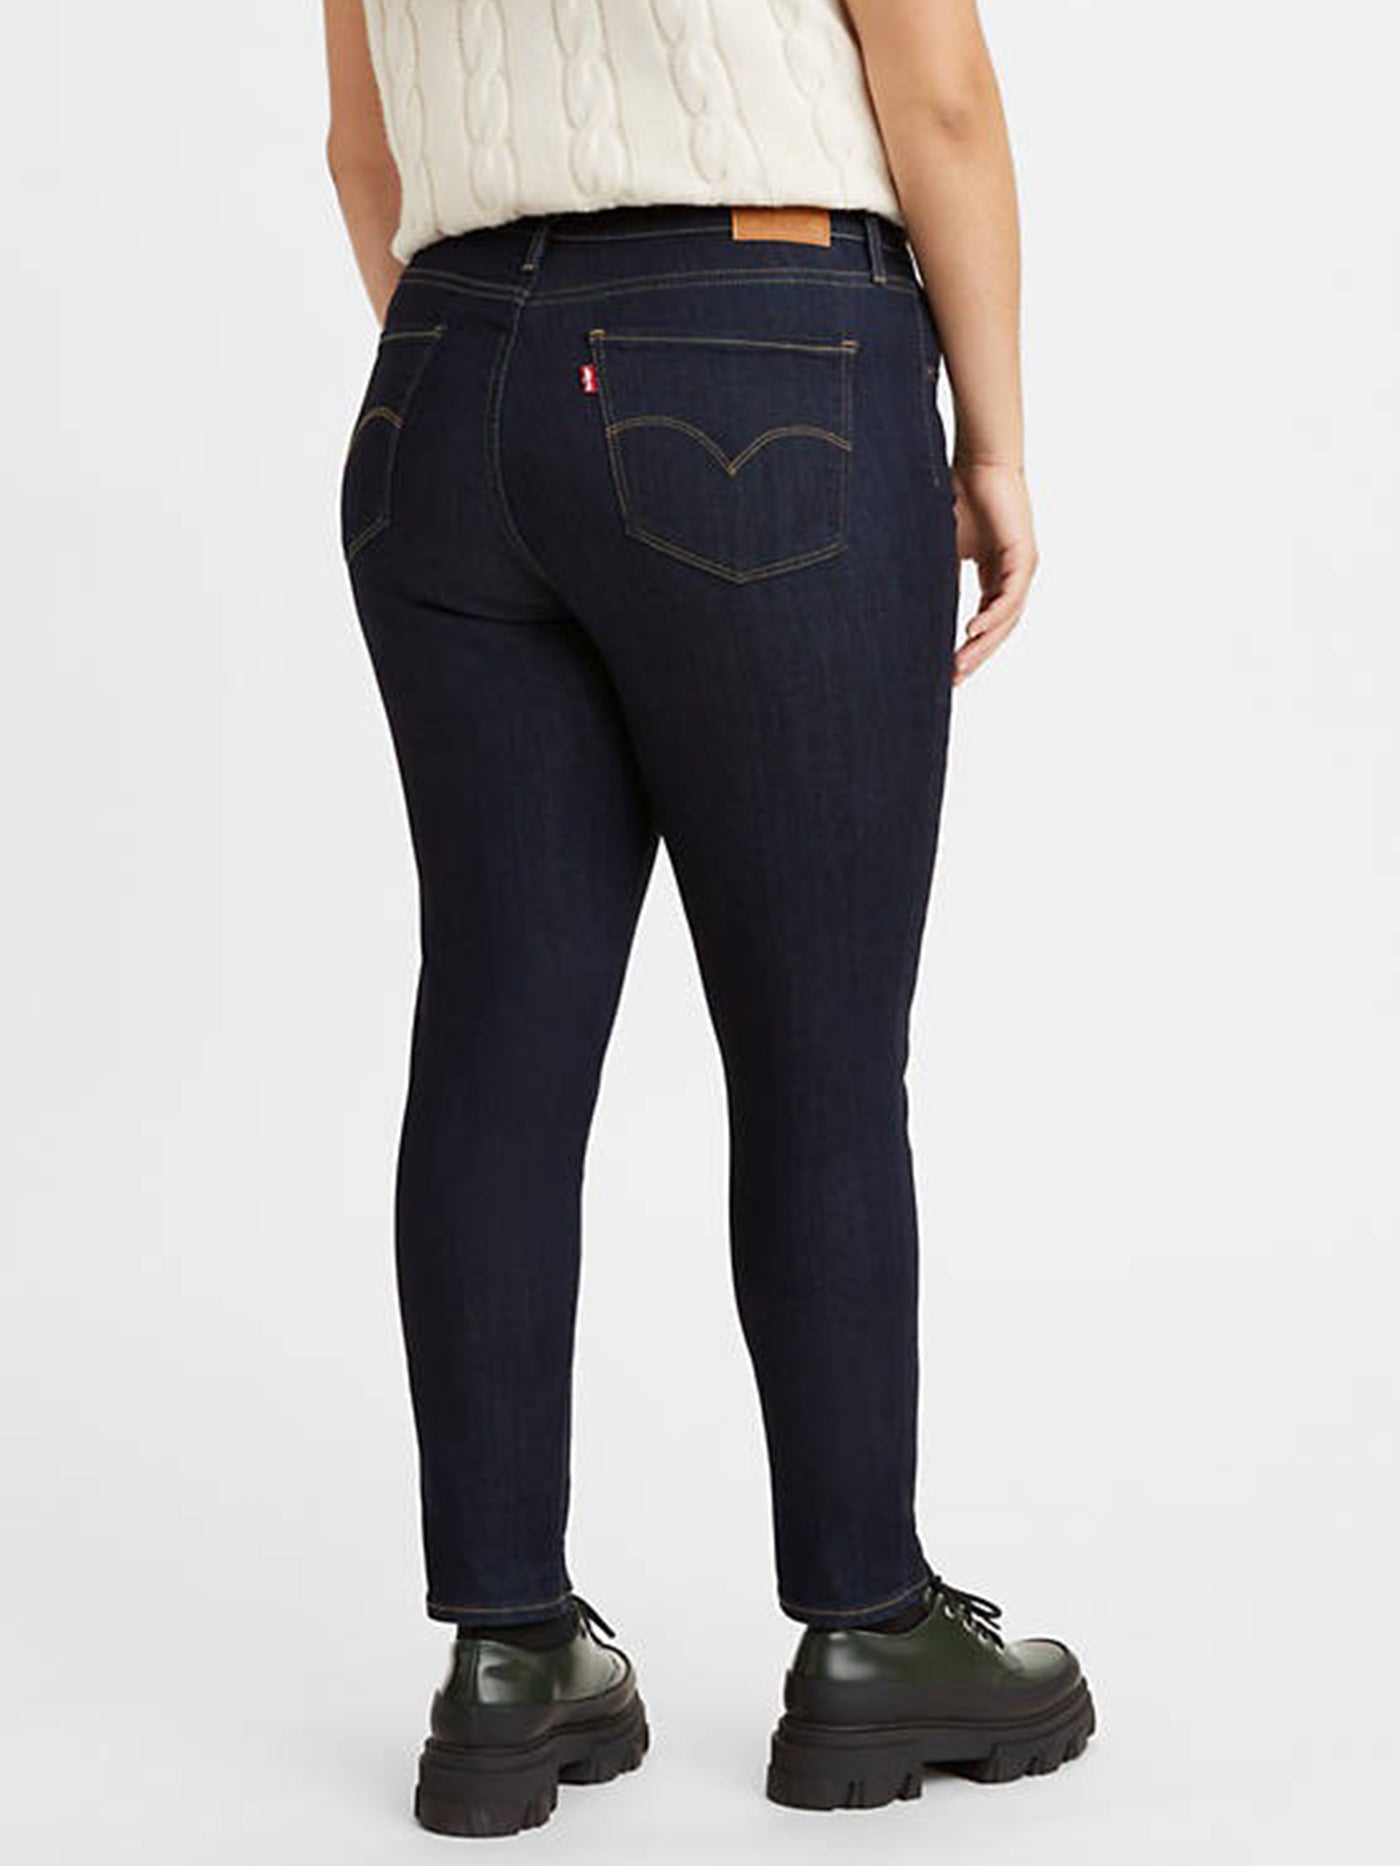 Levi's 721 High Rise Skinny Fit Jeans